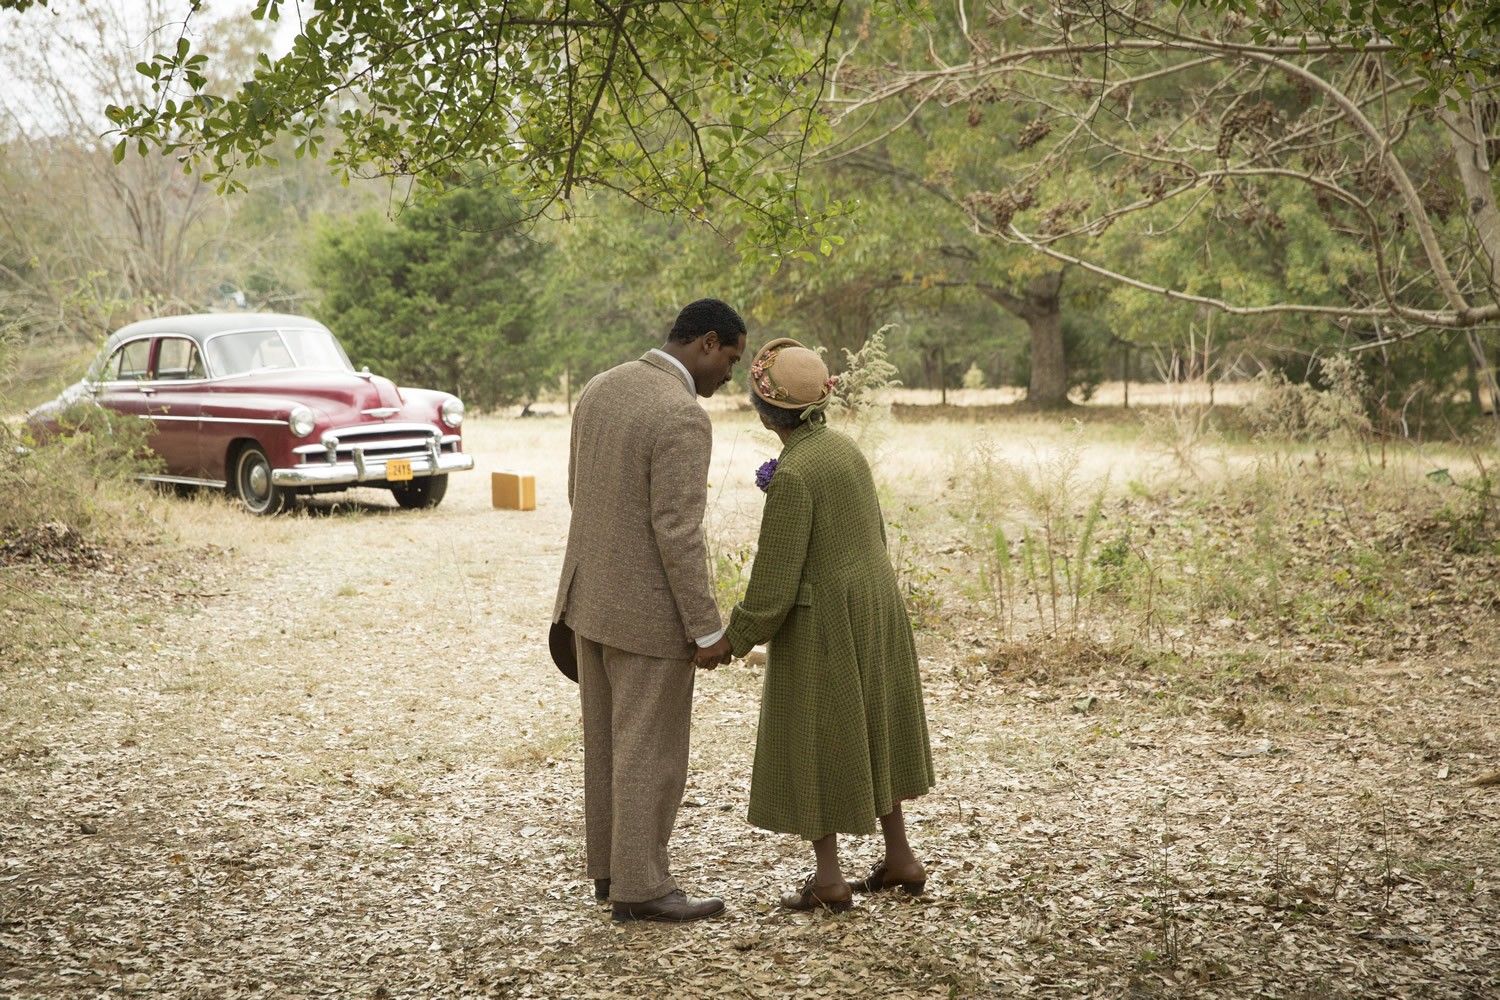 Blair Underwood stars as Ludie Watts and Cicely Tyson stars as Mrs. Watts in Lifetime's The Trip to Bountiful (2014). Photo credit by Bob Mahoney.